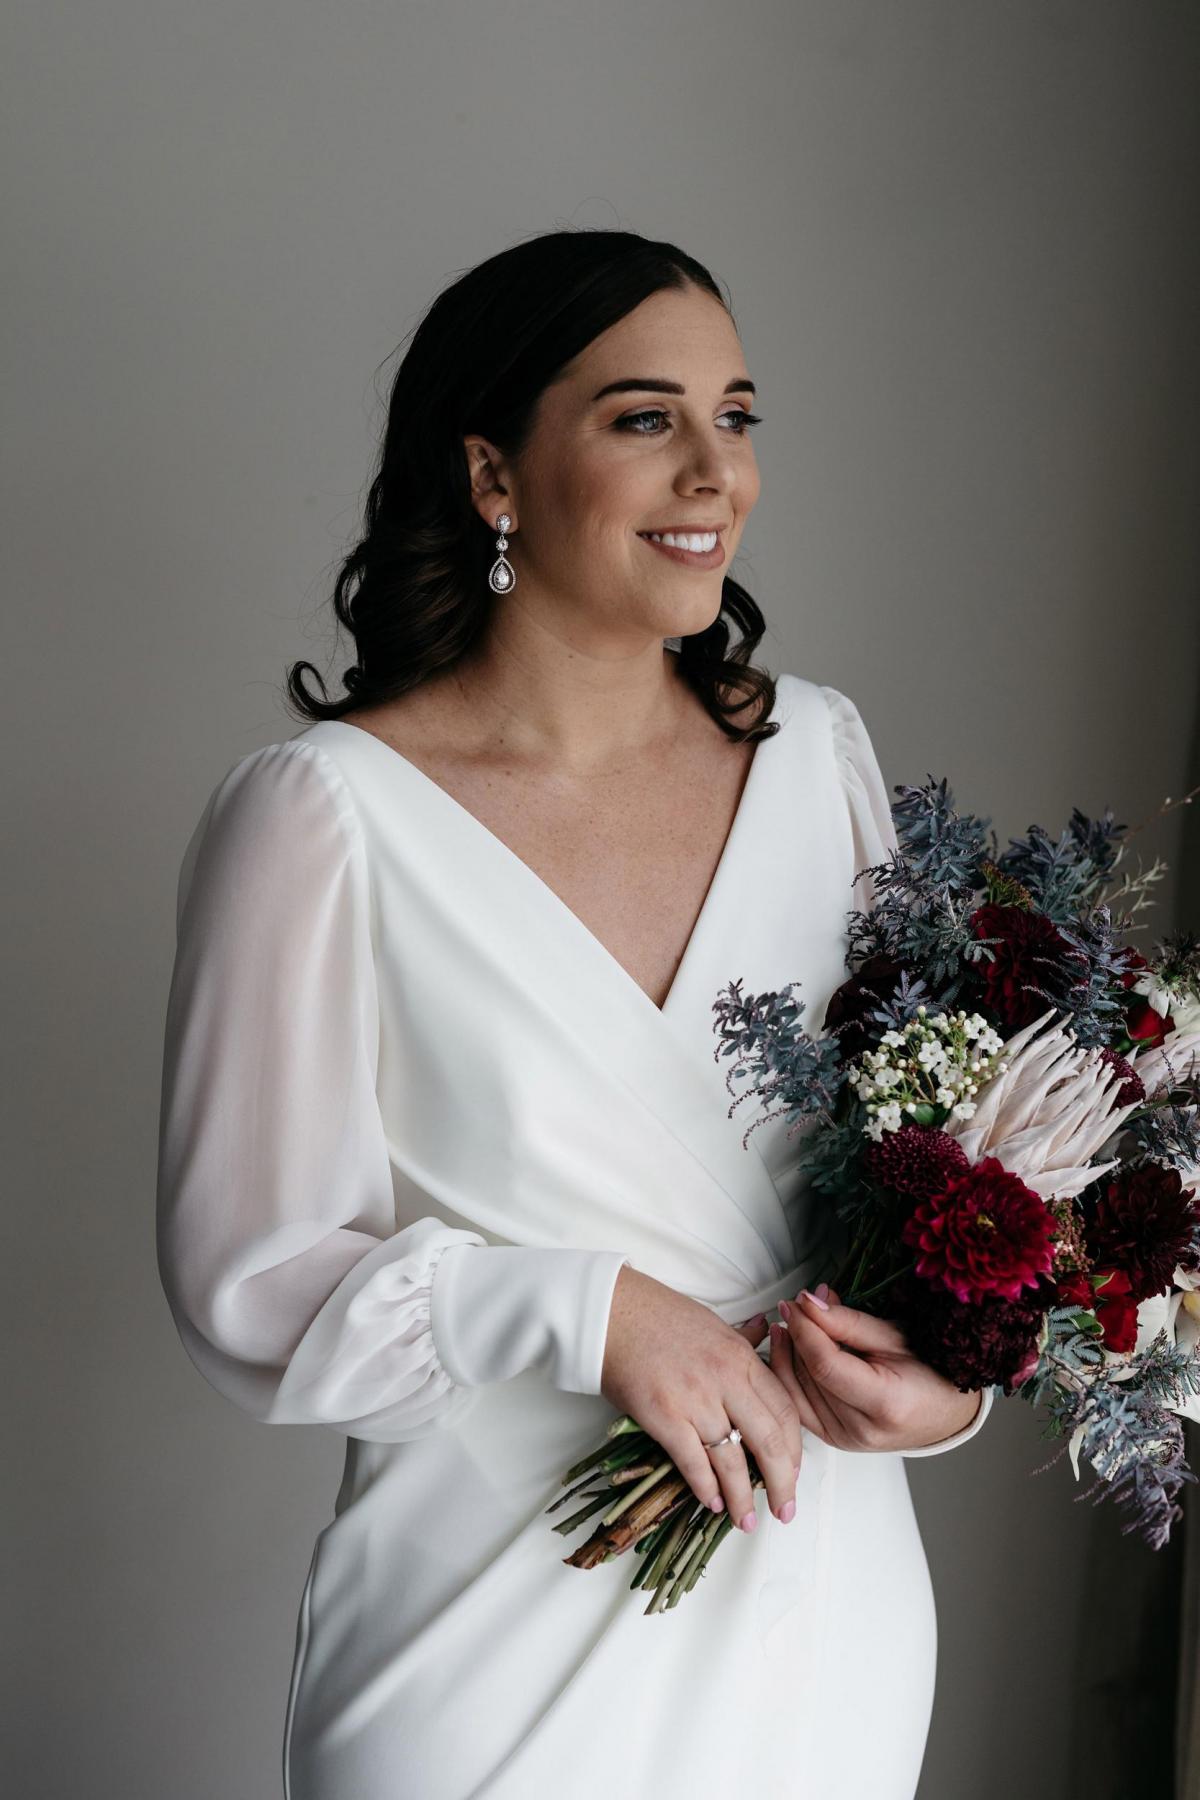 Read all about our real bride's wedding in this blog. She wore the Wild Hearts Nikki wedding dress by Karen Willis Holmes.